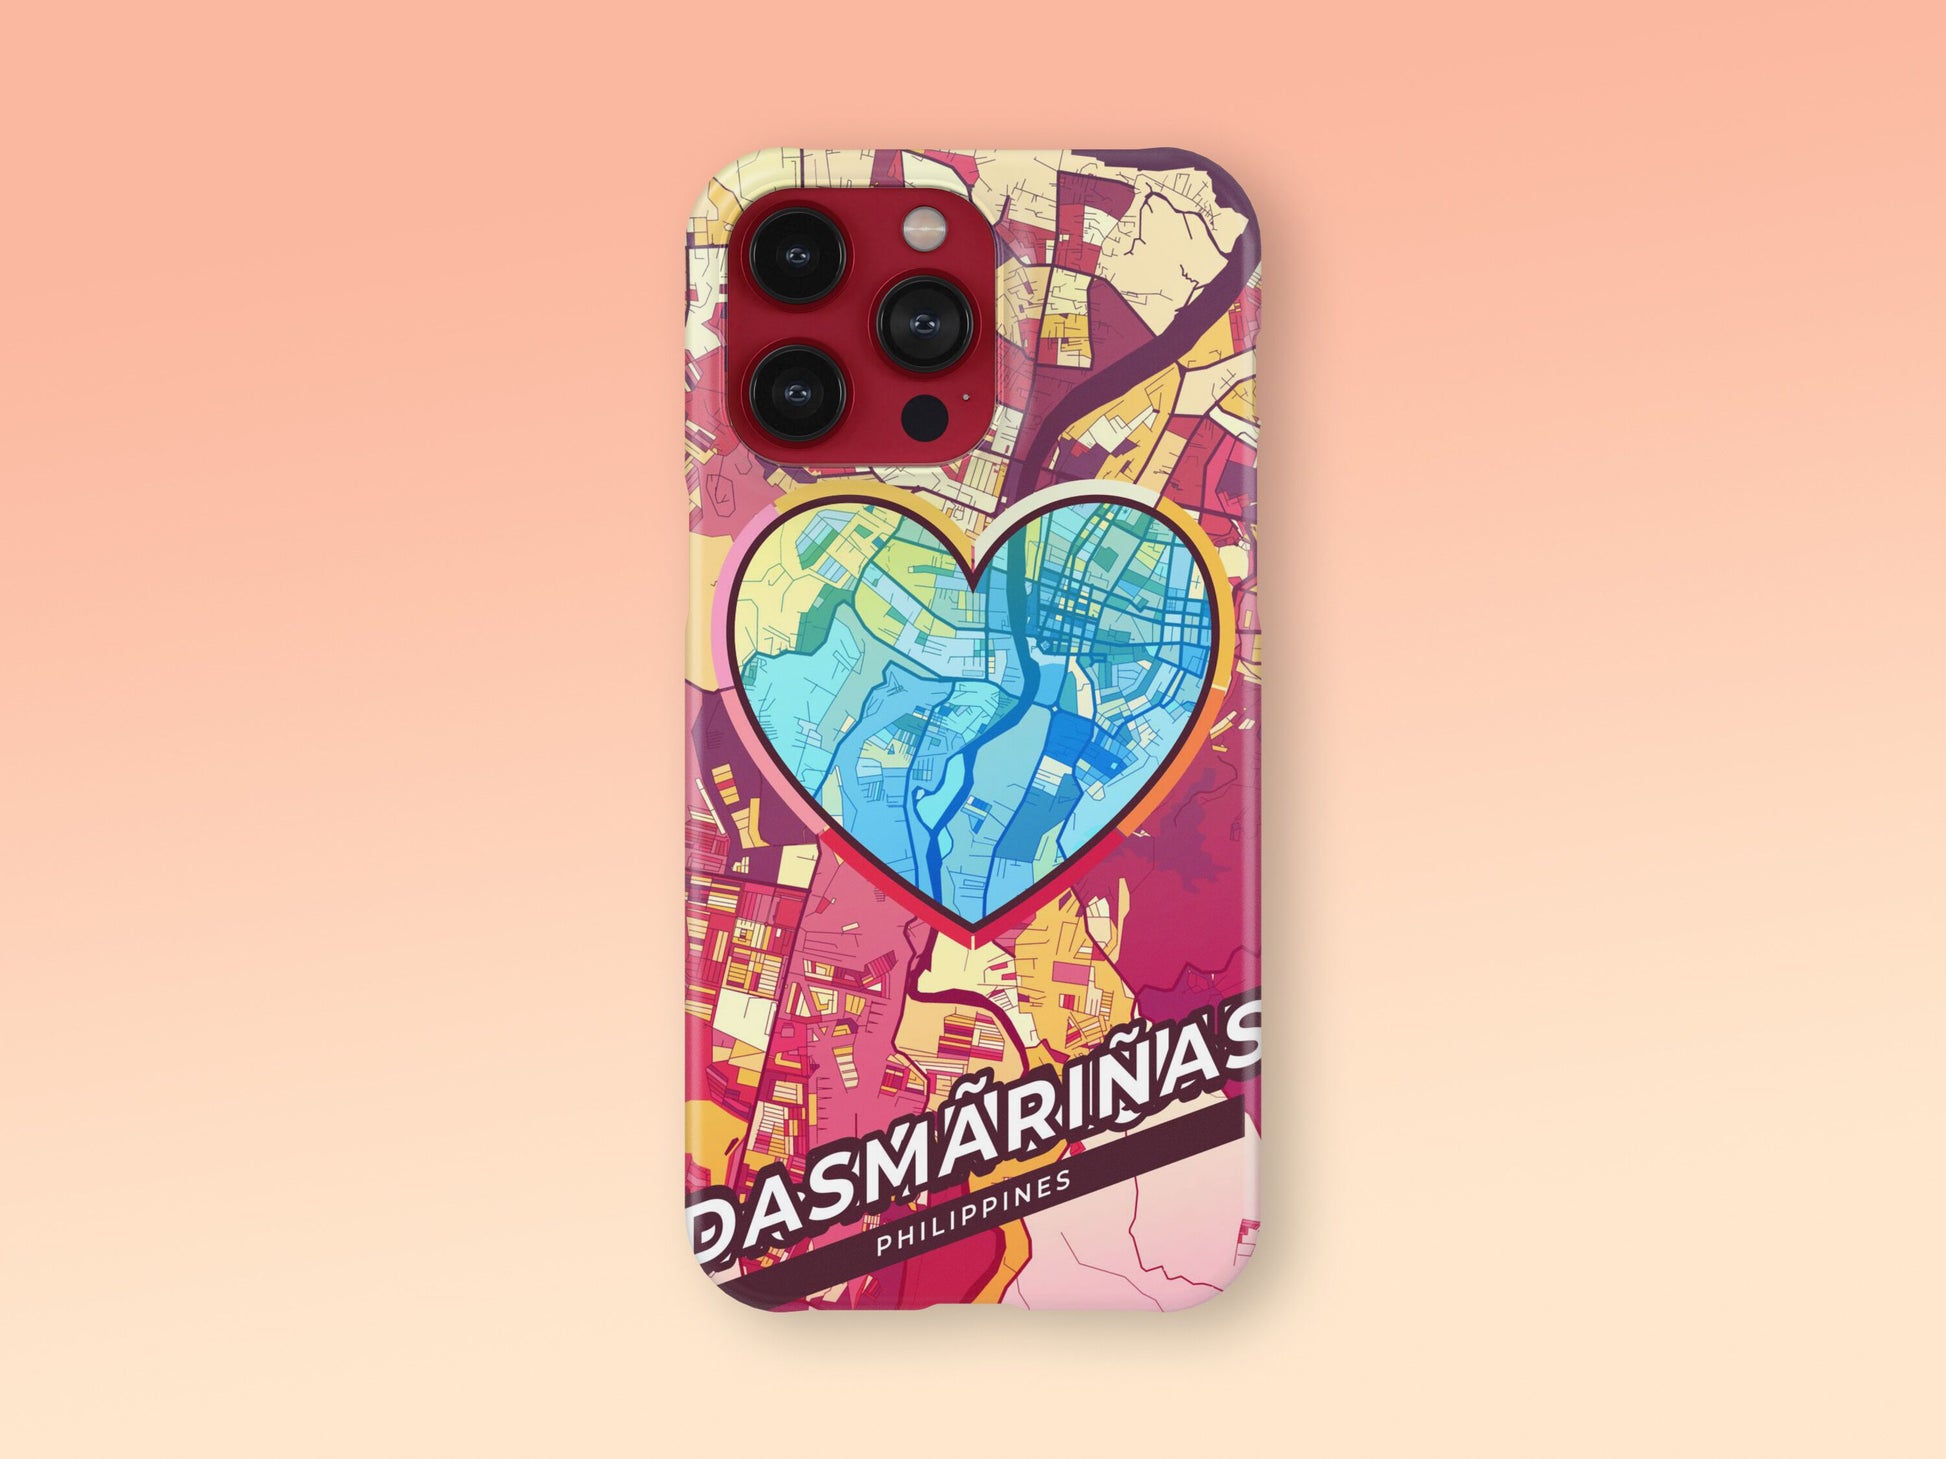 Dasmariñas Philippines slim phone case with colorful icon. Birthday, wedding or housewarming gift. Couple match cases. 2